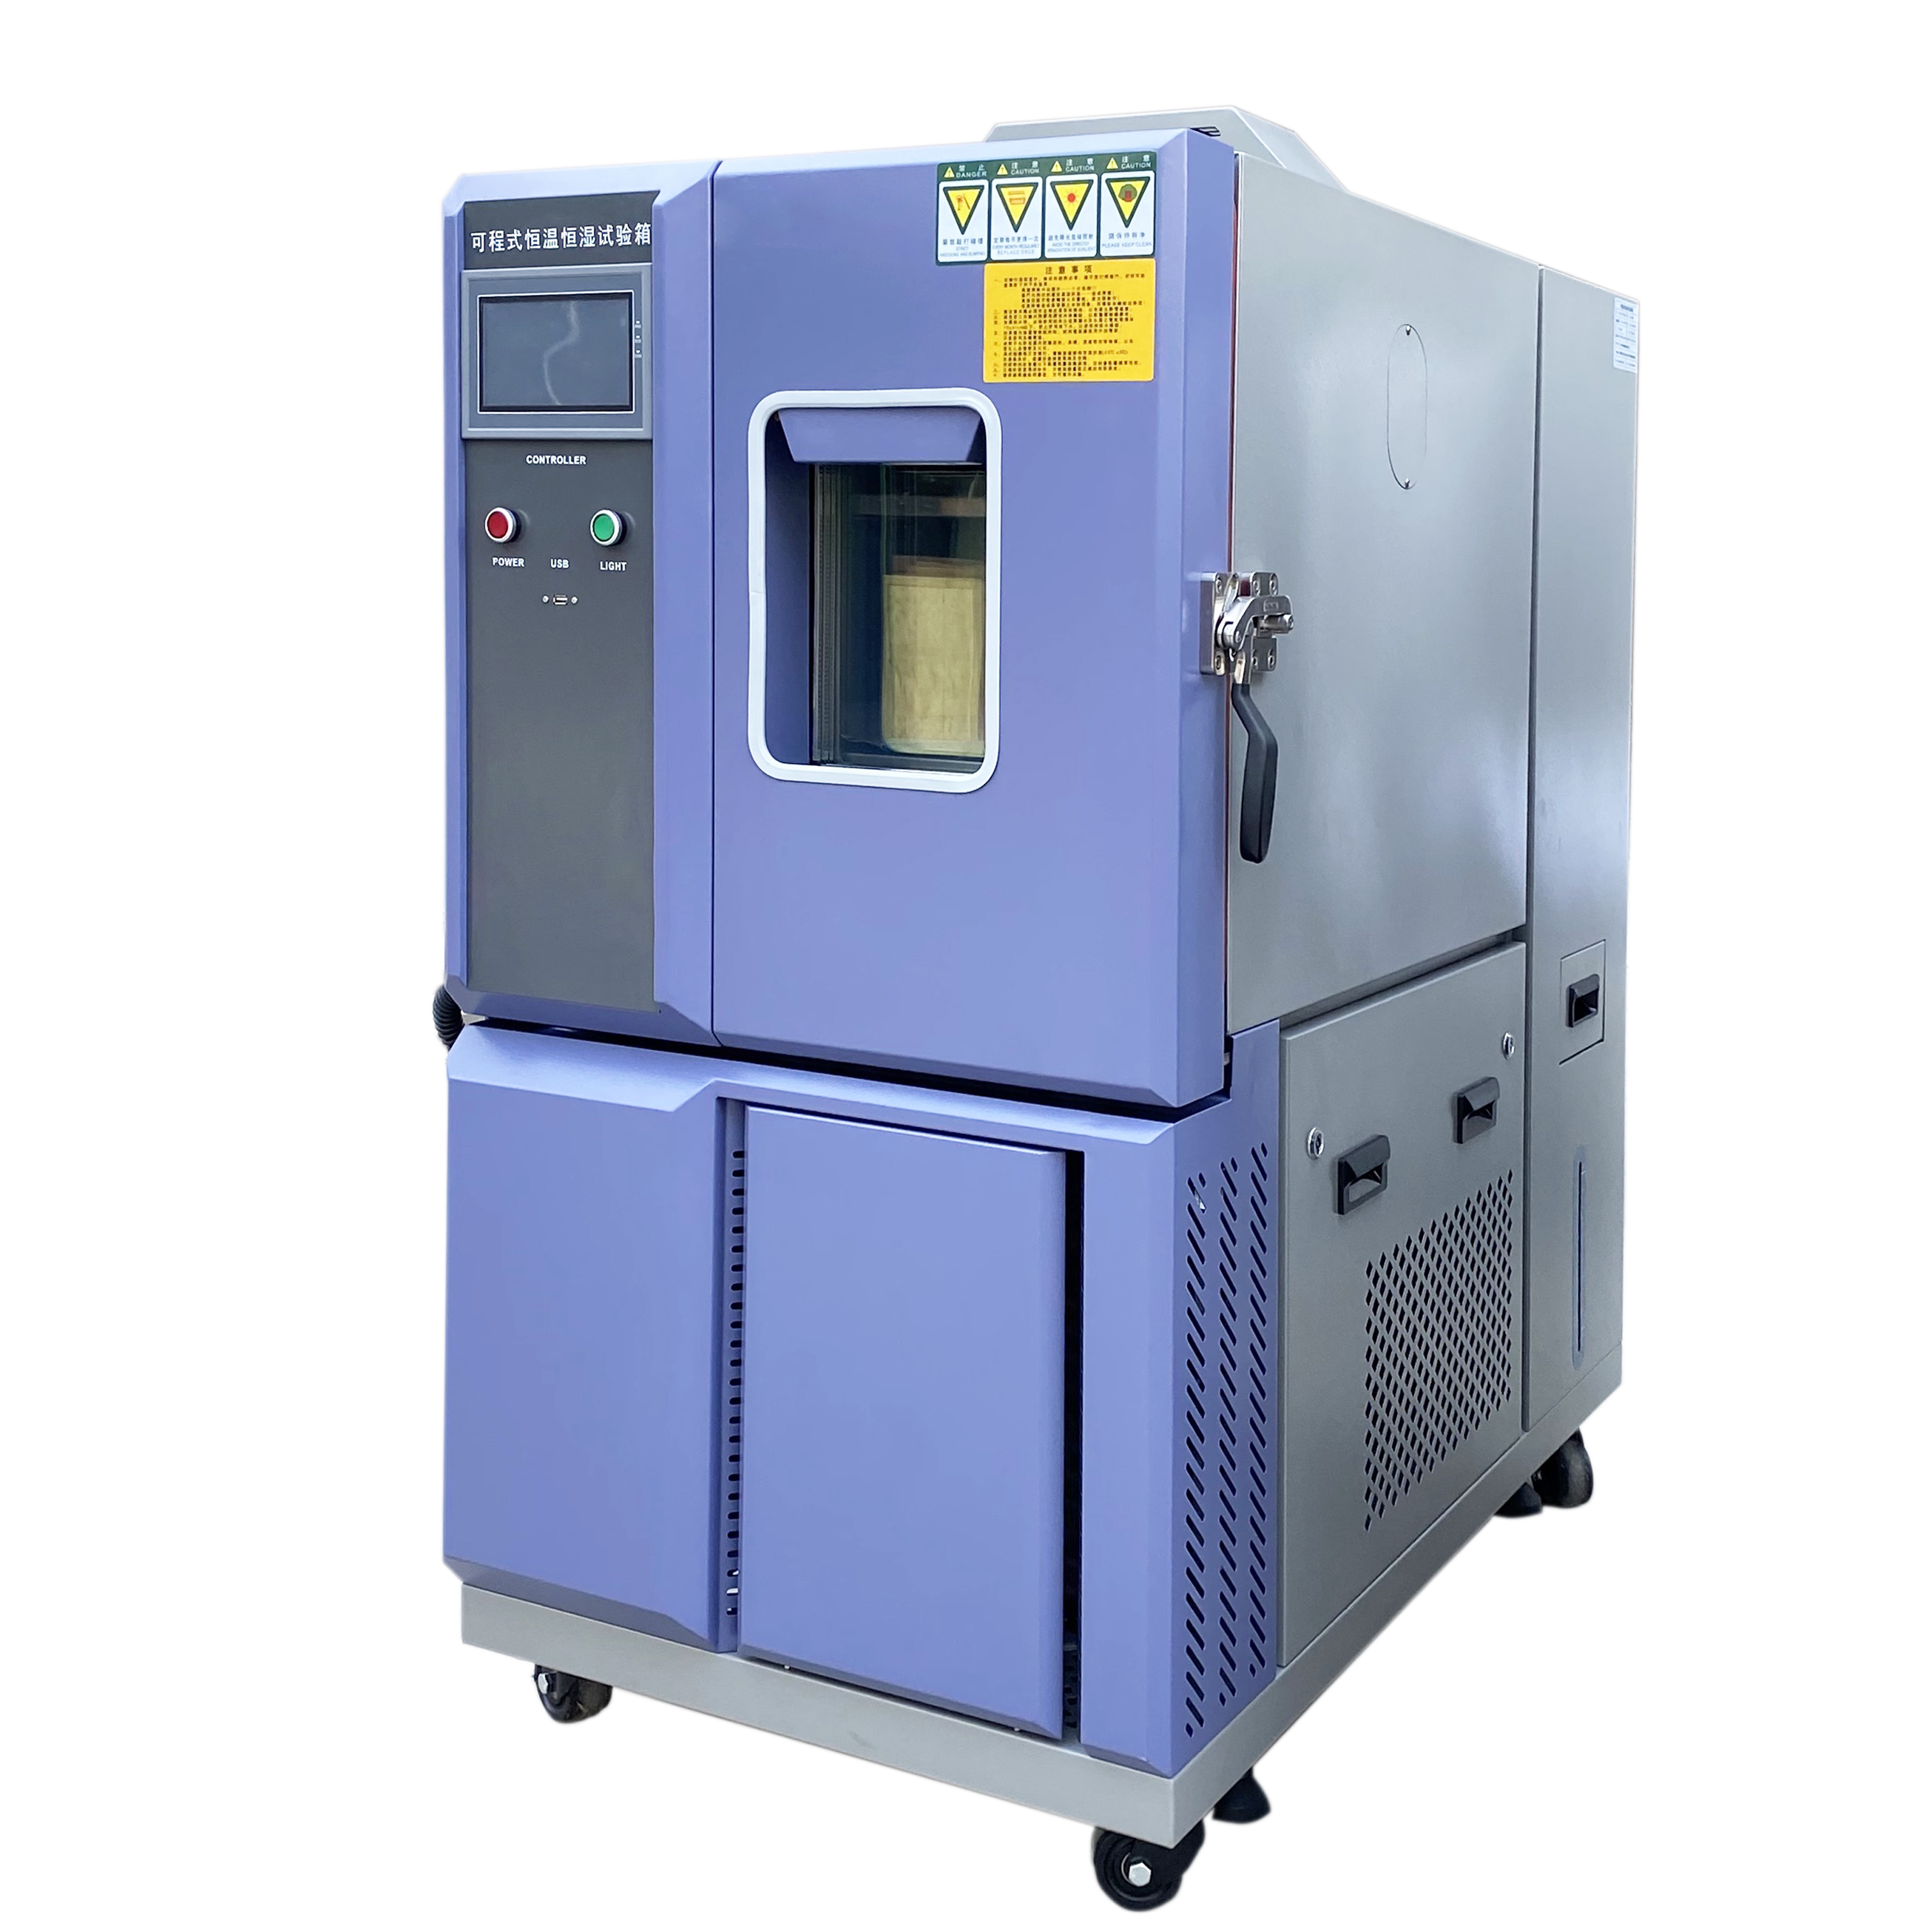 Special Price for High Quality Laboratory Corrosion Test Chamber Salt Spray Test Chamber - Alternating High-low Temperature Testing Environment Auto Temperature And Humidity Controls Stability Cha...